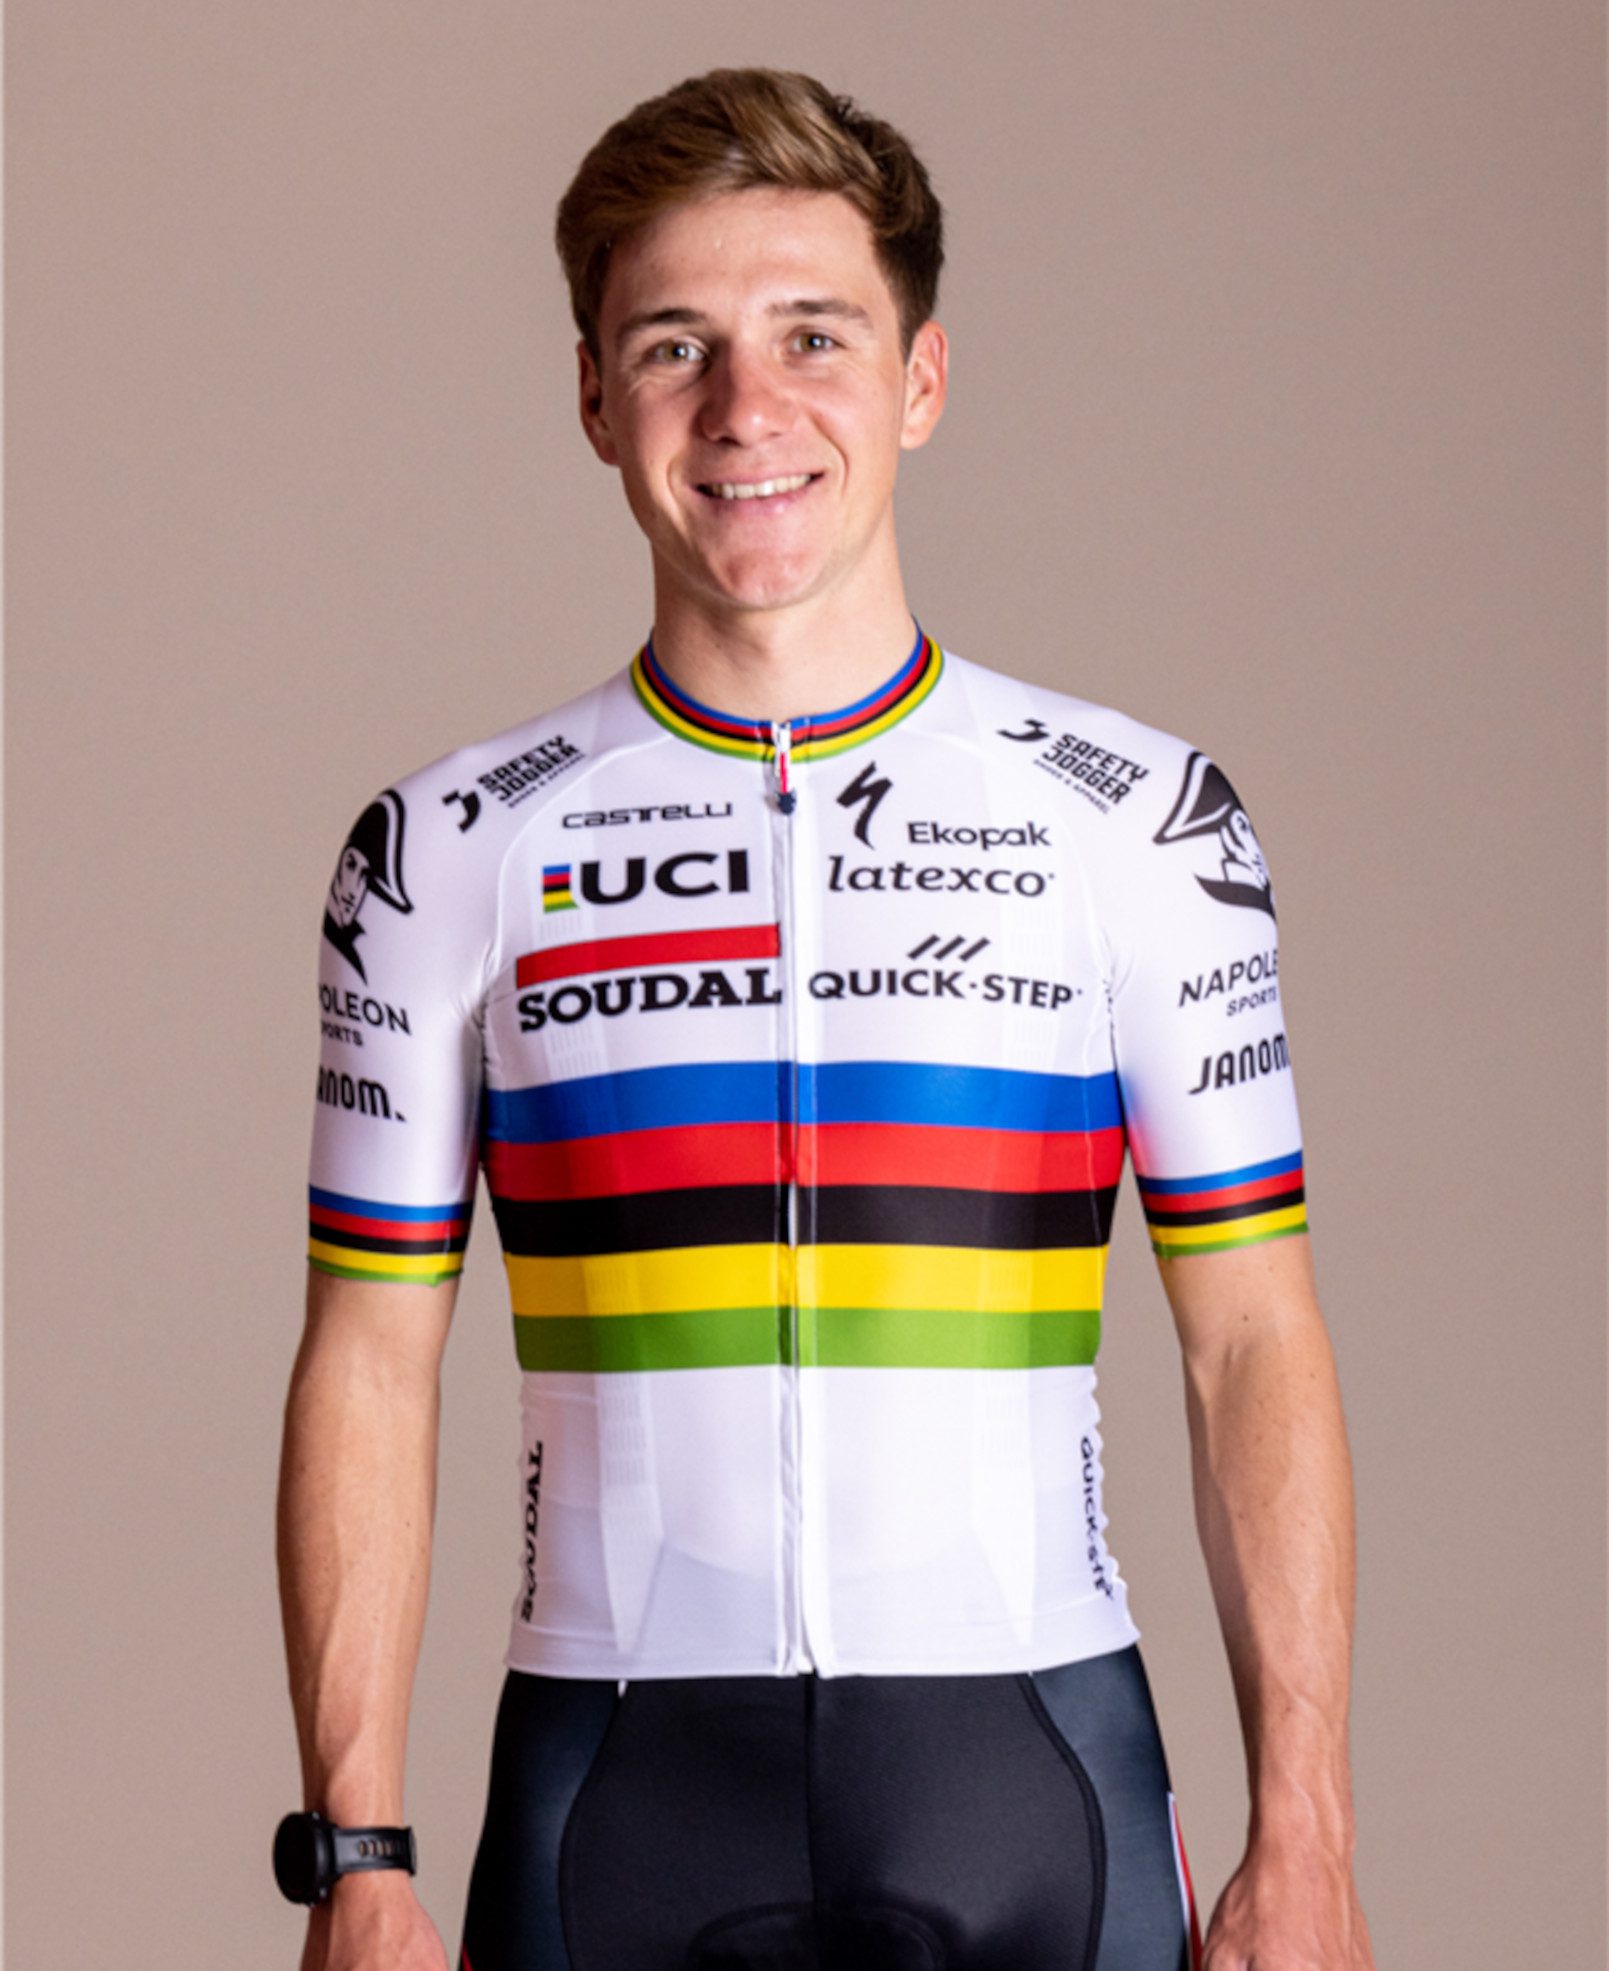 The history of the World Championships rainbow jersey